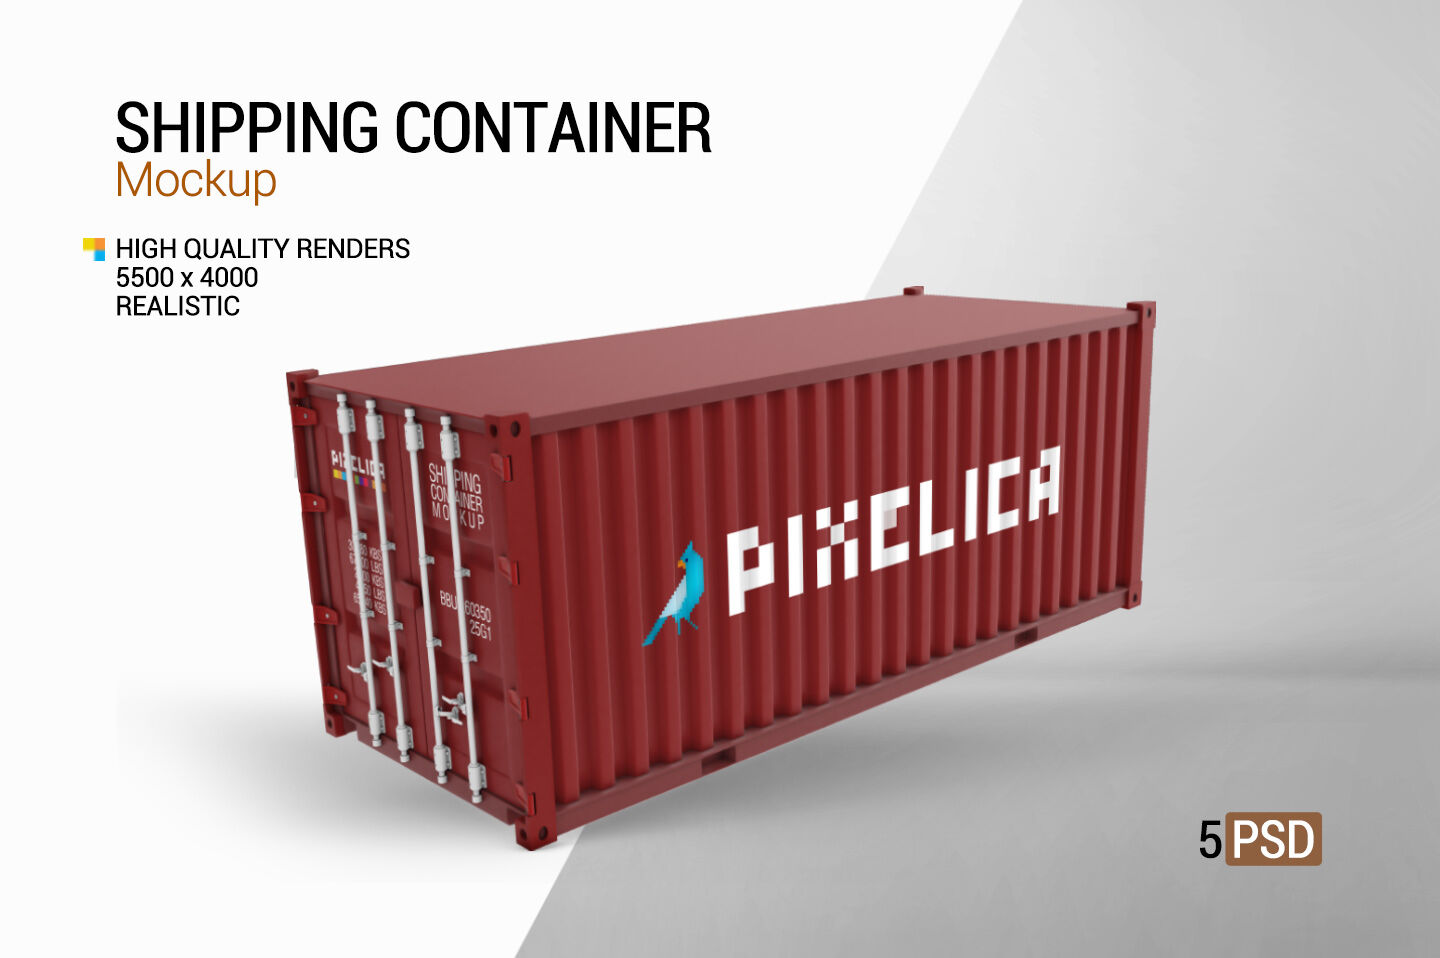 Shipping Container Mockup By Pixelica21 Thehungryjpeg Com